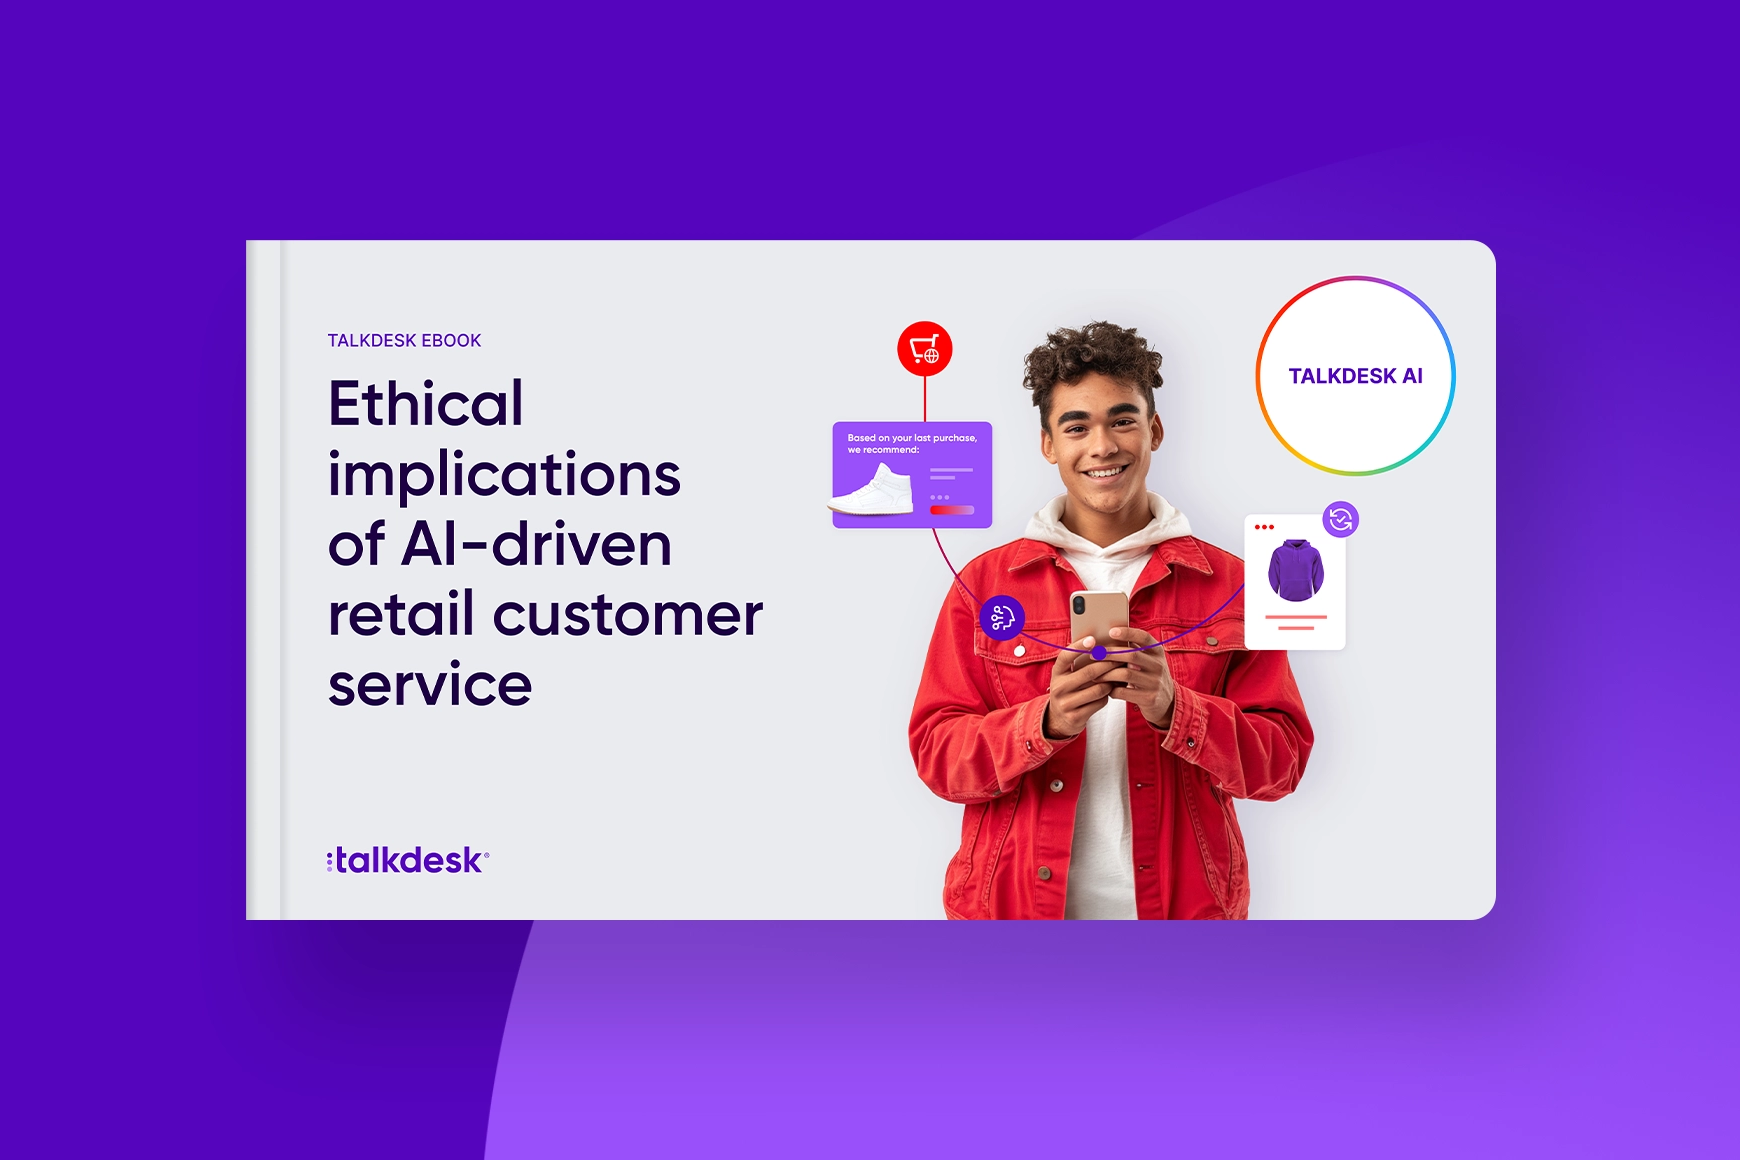 Ethical implications of AI-driven retail customer service